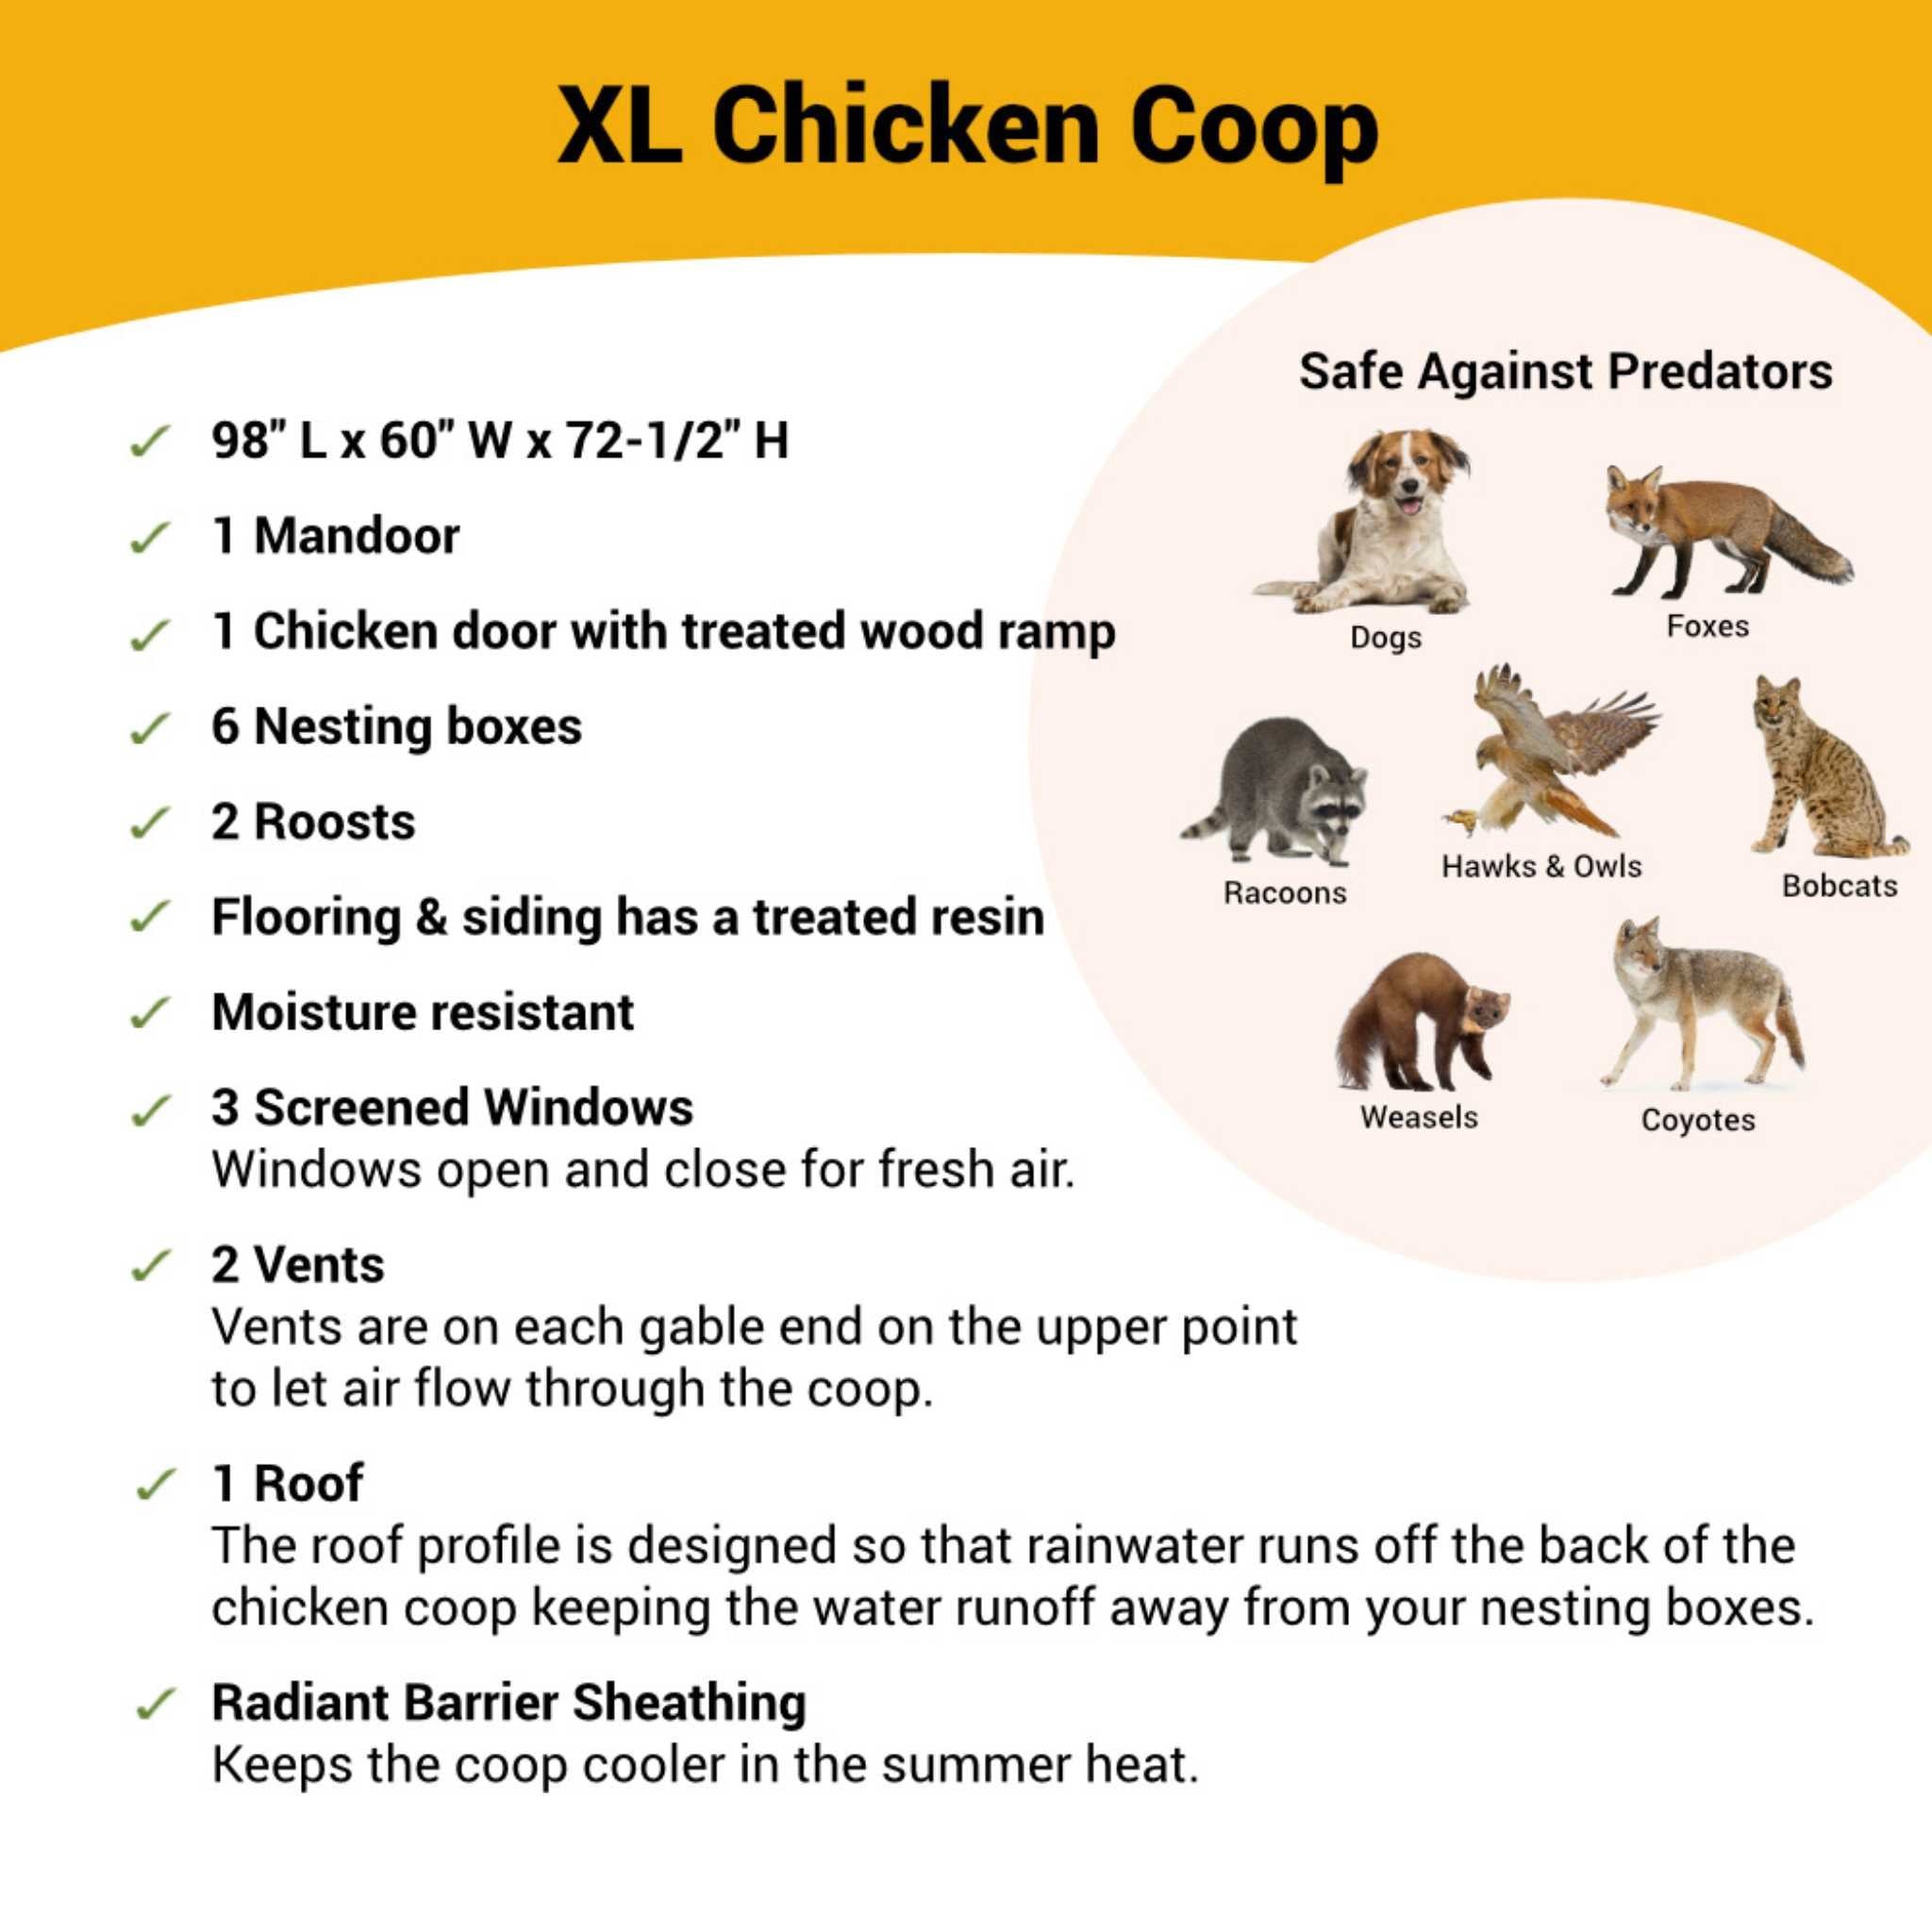 Hatching Time OverEZ XL chicken coop infographic shows coop is safe against predators. dimensions and details are also shown in image for XL chicken coop.